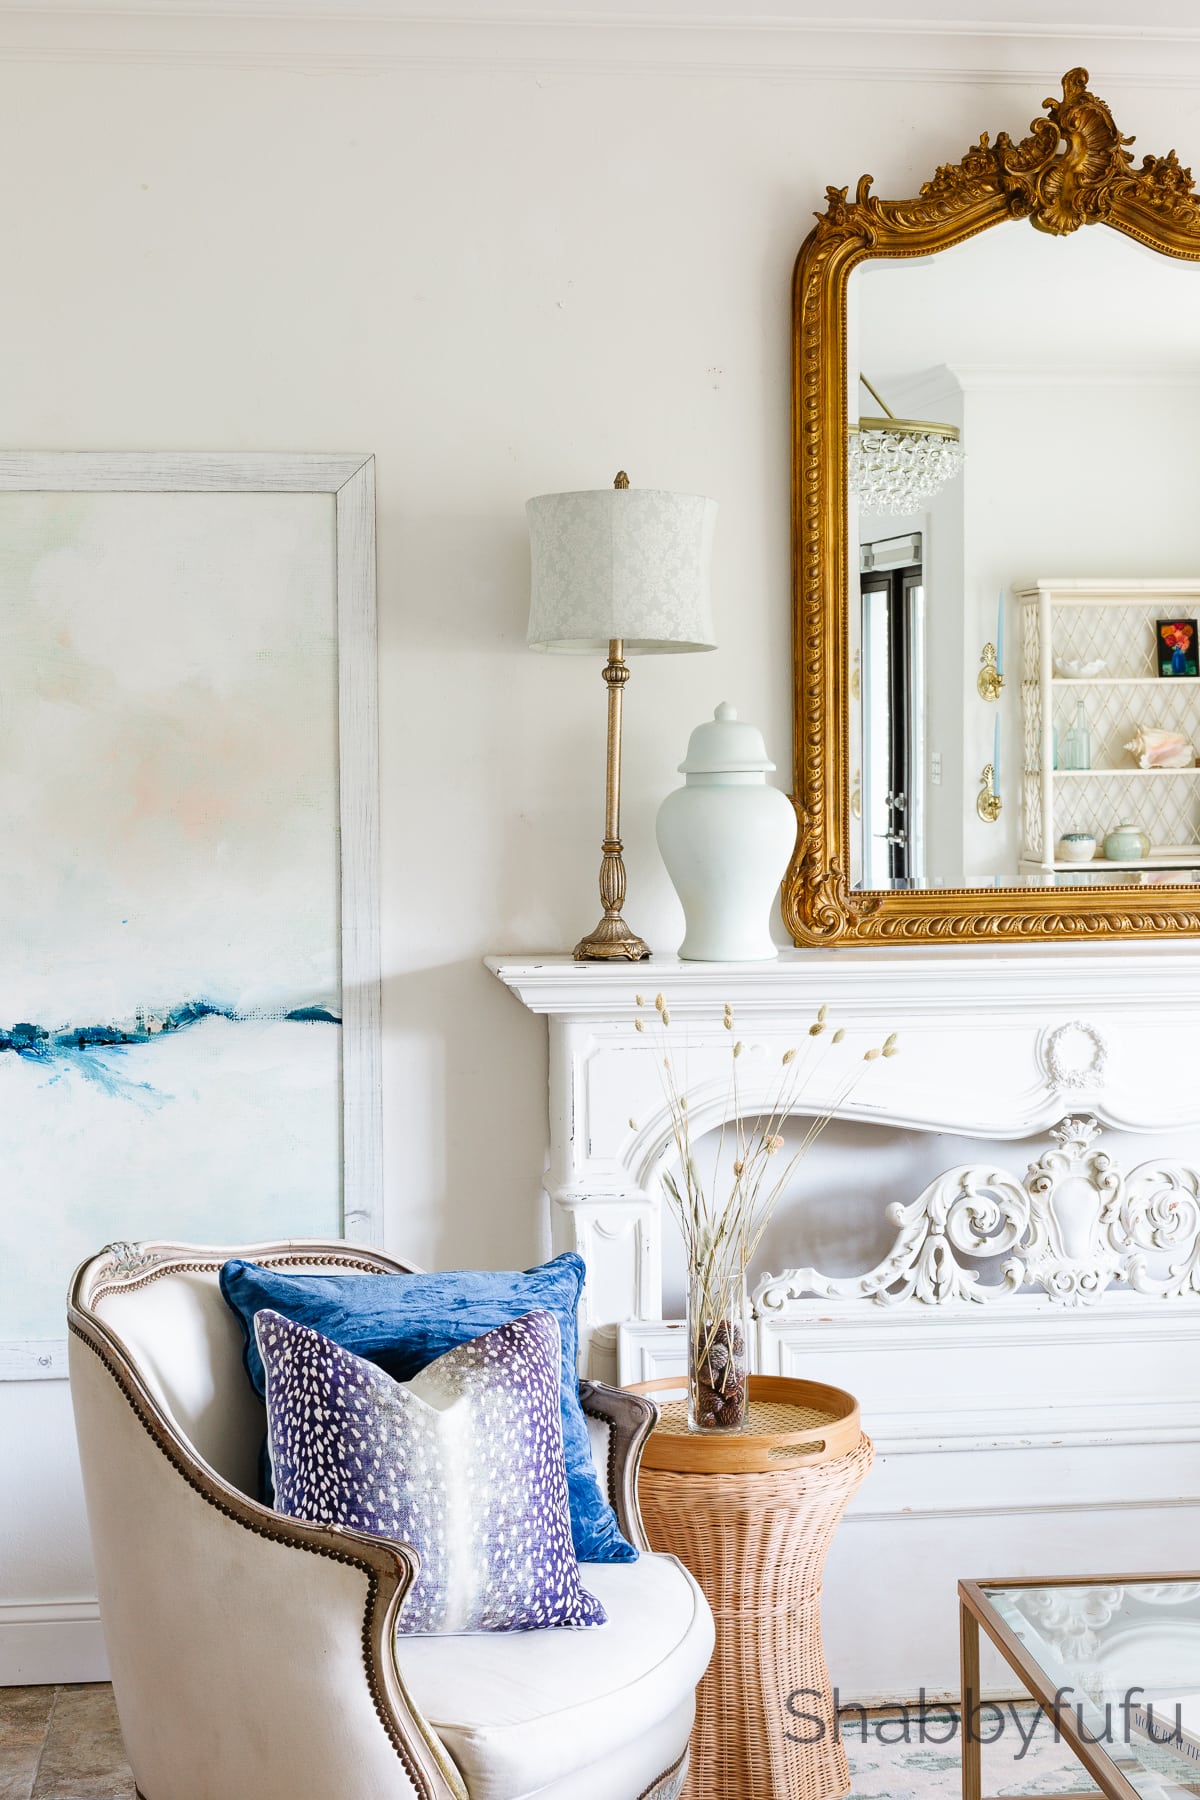 5 Clever Ways to Make a Small Space Cozy and Inviting (Courtney's